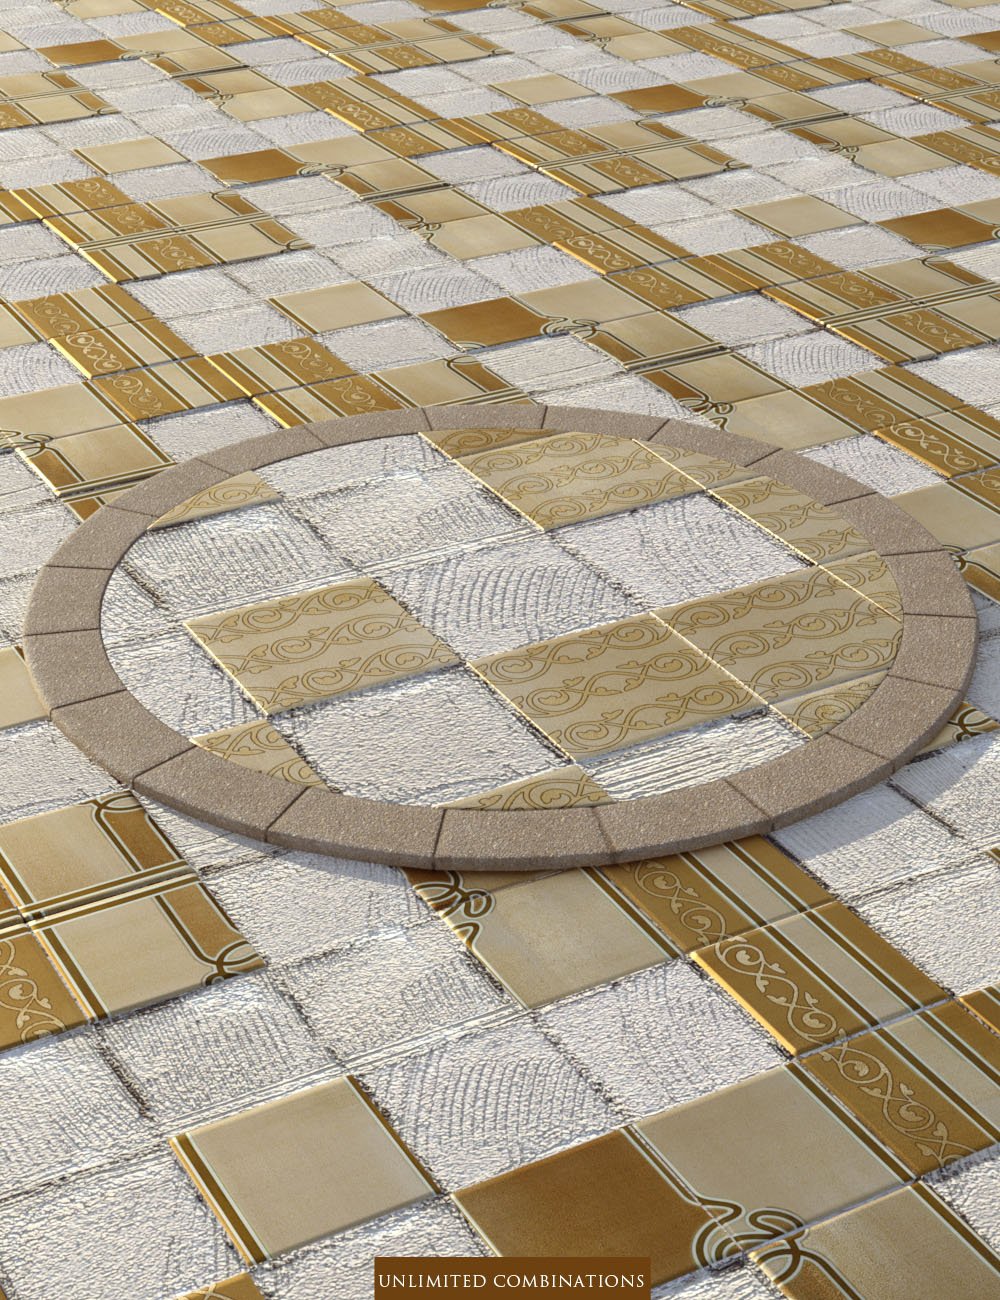 Sumptuous Metallic Tile Shader Builder by: ForbiddenWhispers, 3D Models by Daz 3D